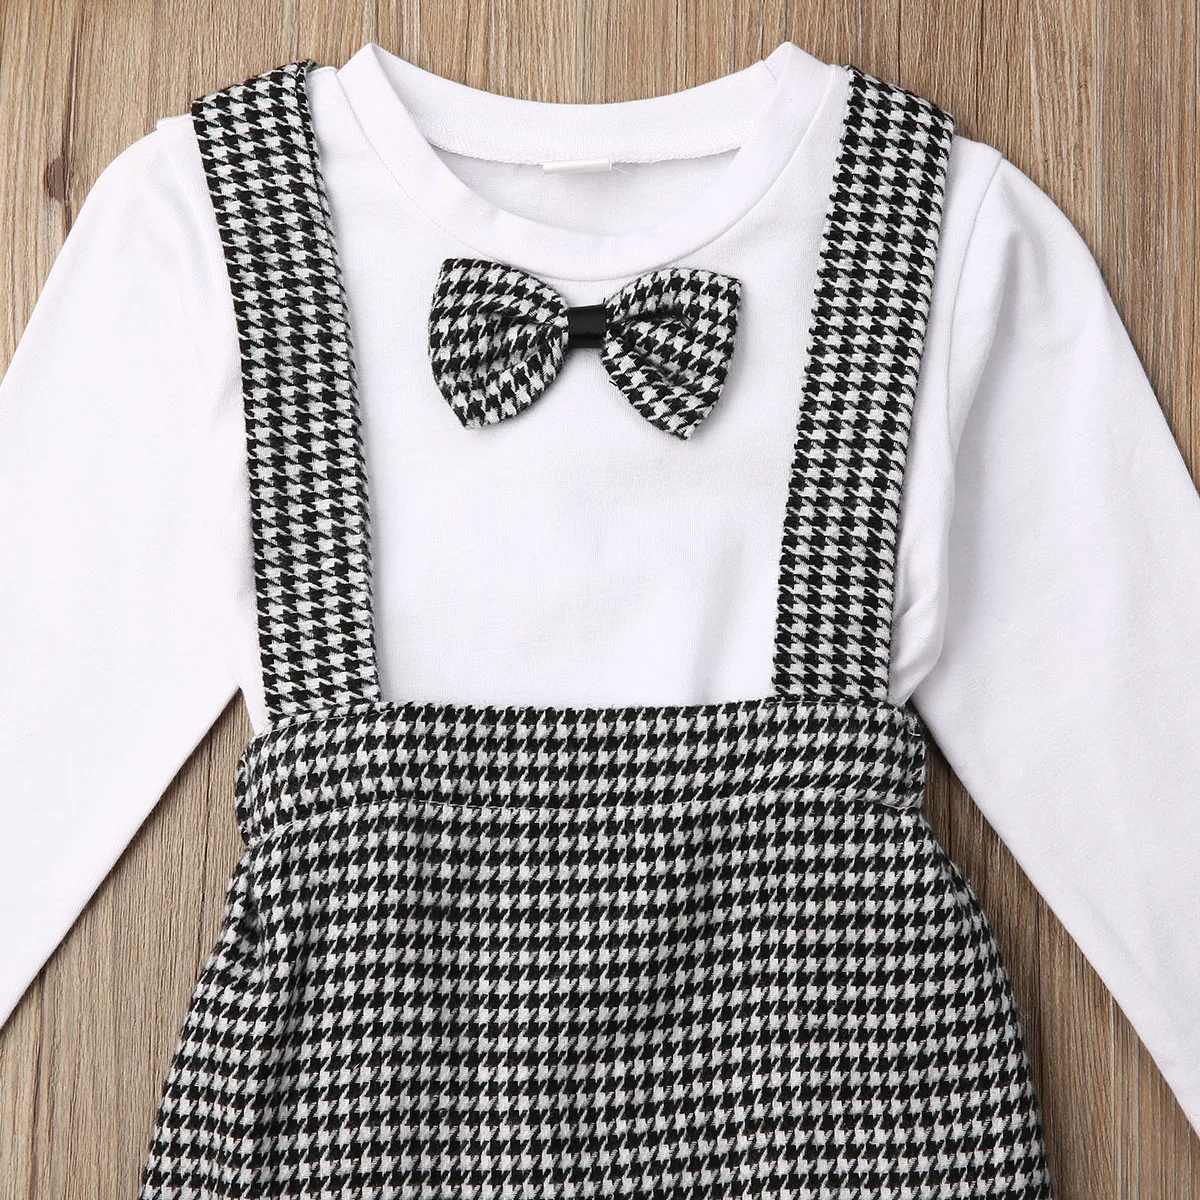 FORESTIME Cute Infant Baby Girls Floral Casual Winter Drees Cotton Playsuit Clothes